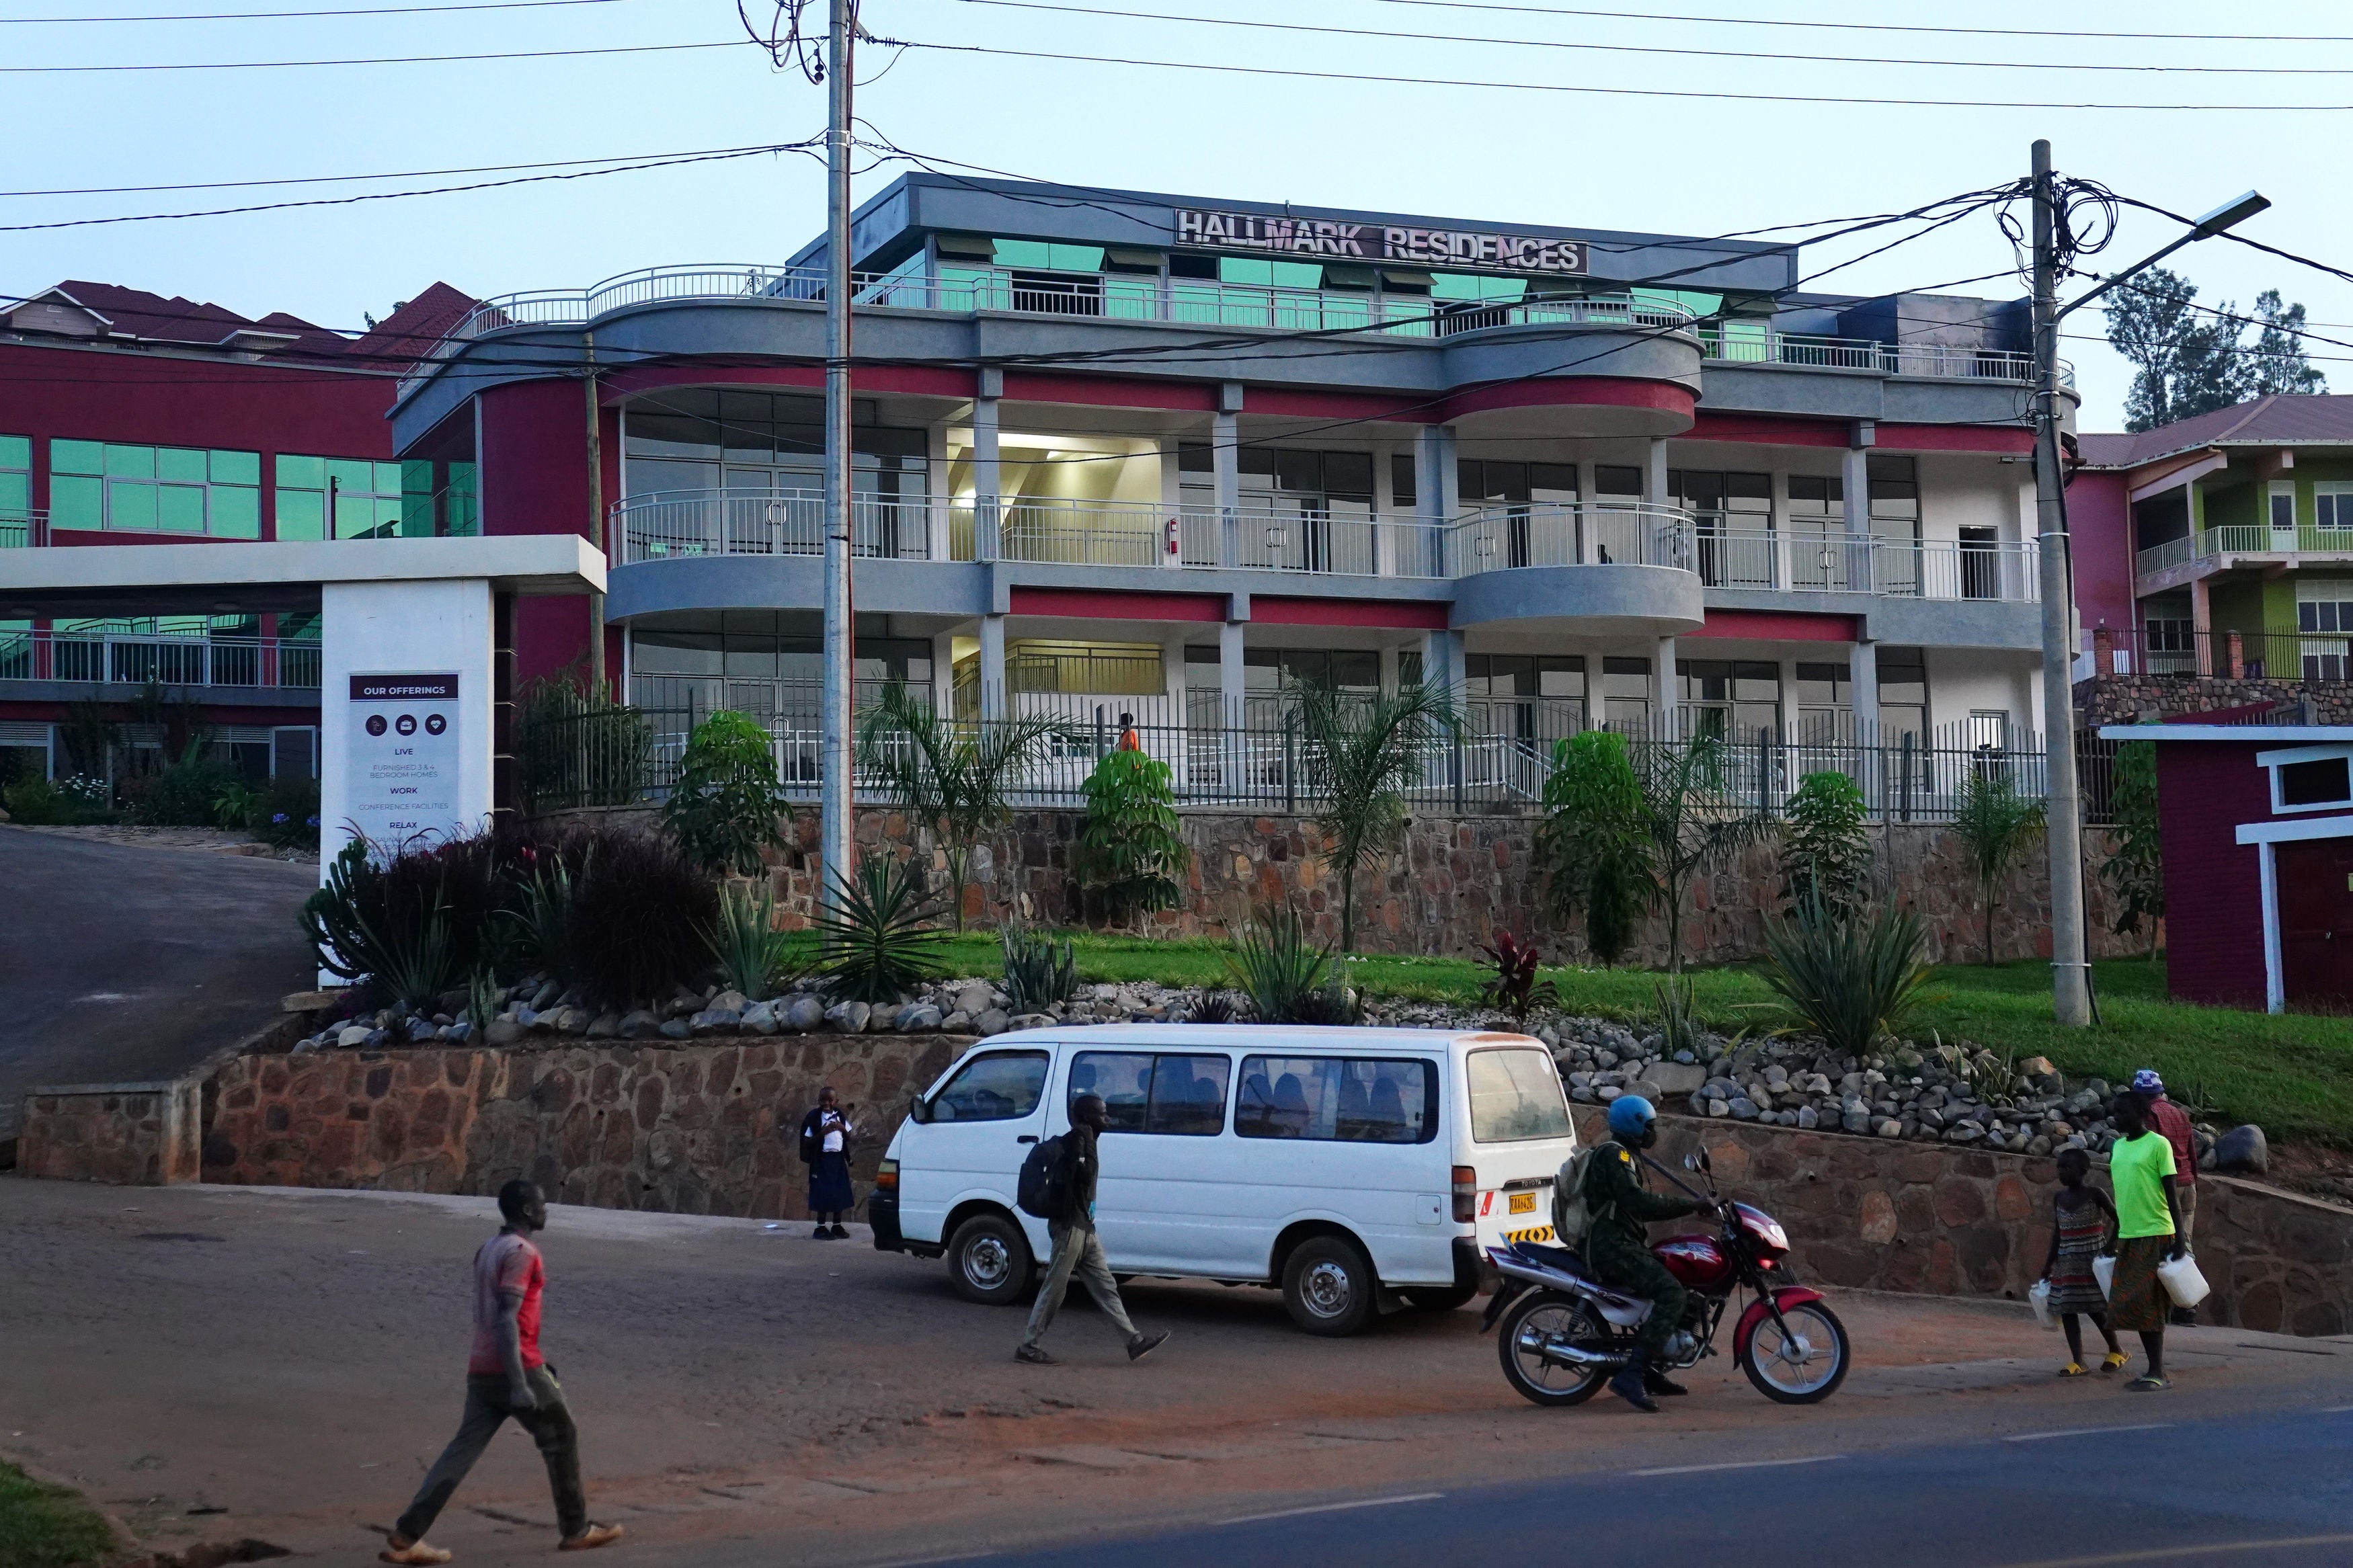 The Hallmark Residences Hotel in Kigali, Rwanda, where it is believed migrants from the UK are expected to be taken when they arrive